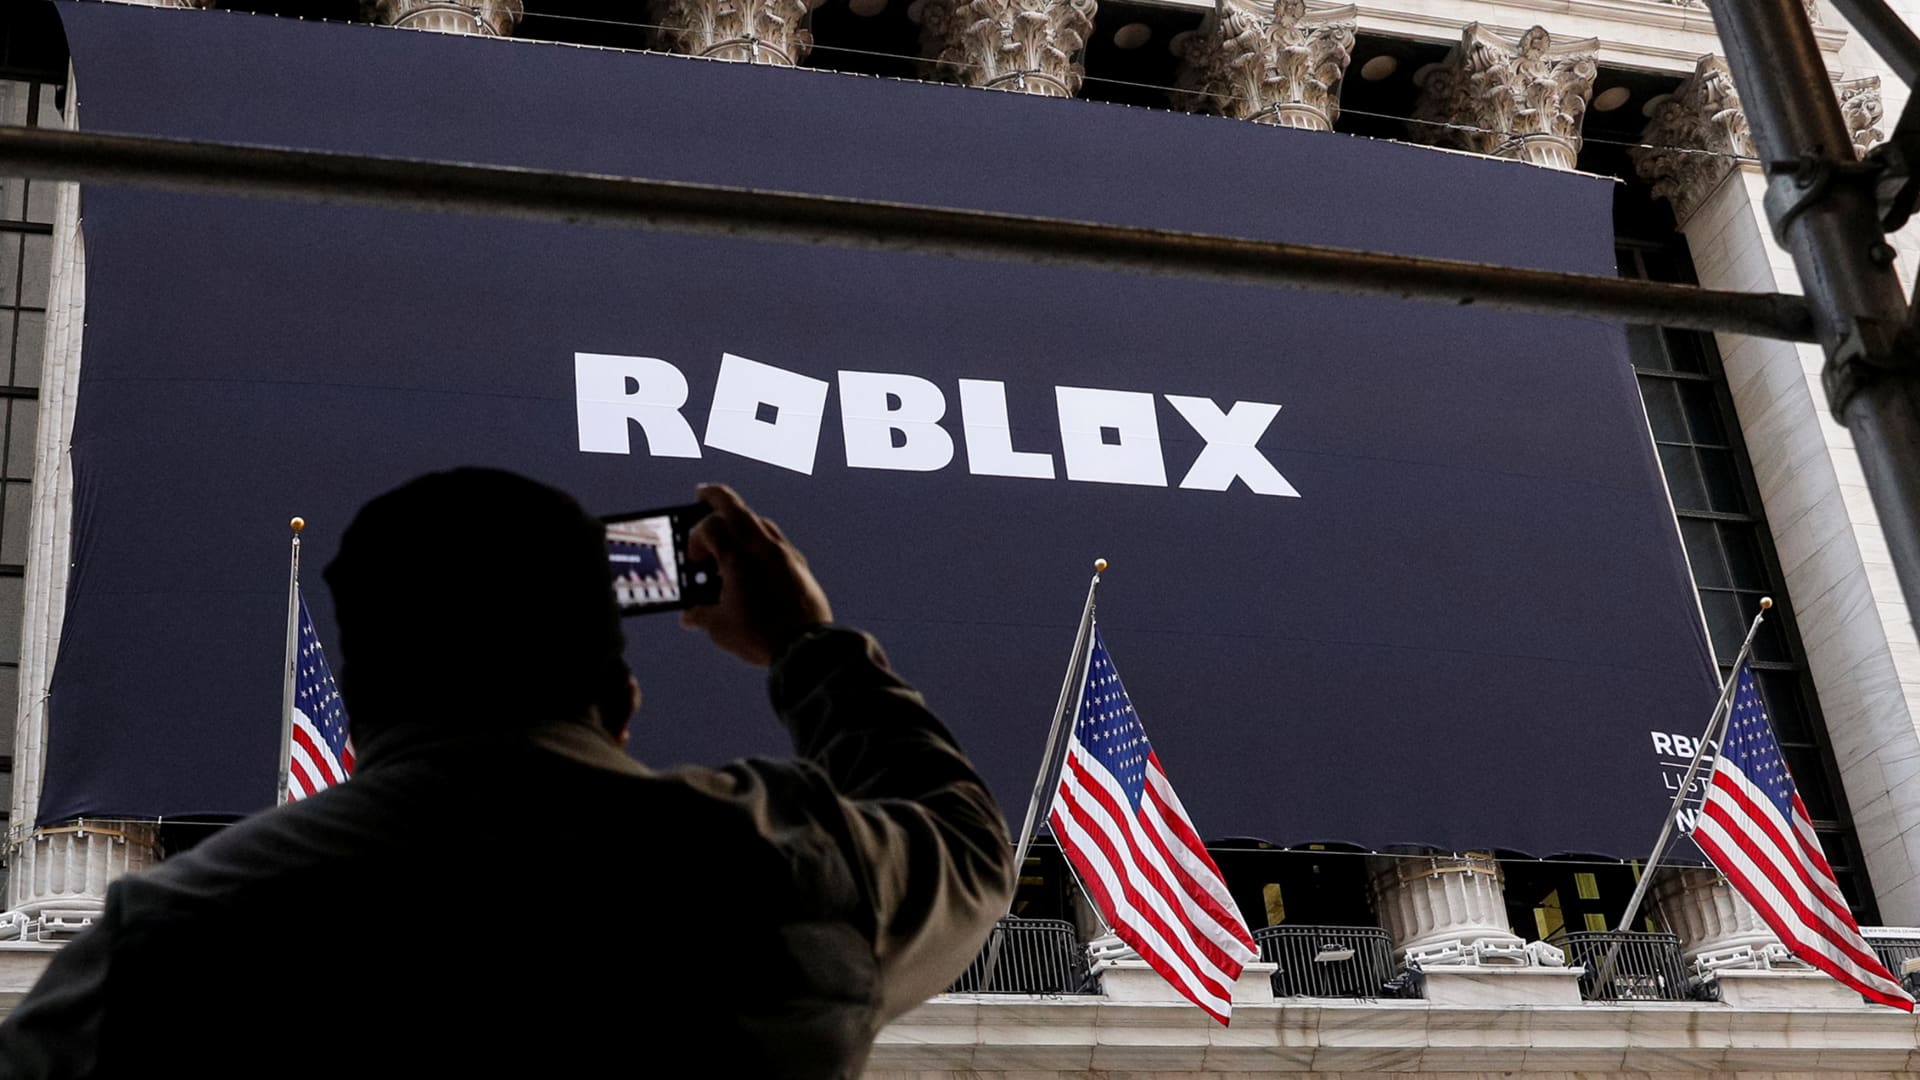 Roblox shares dip after reporting wider-than-expected loss